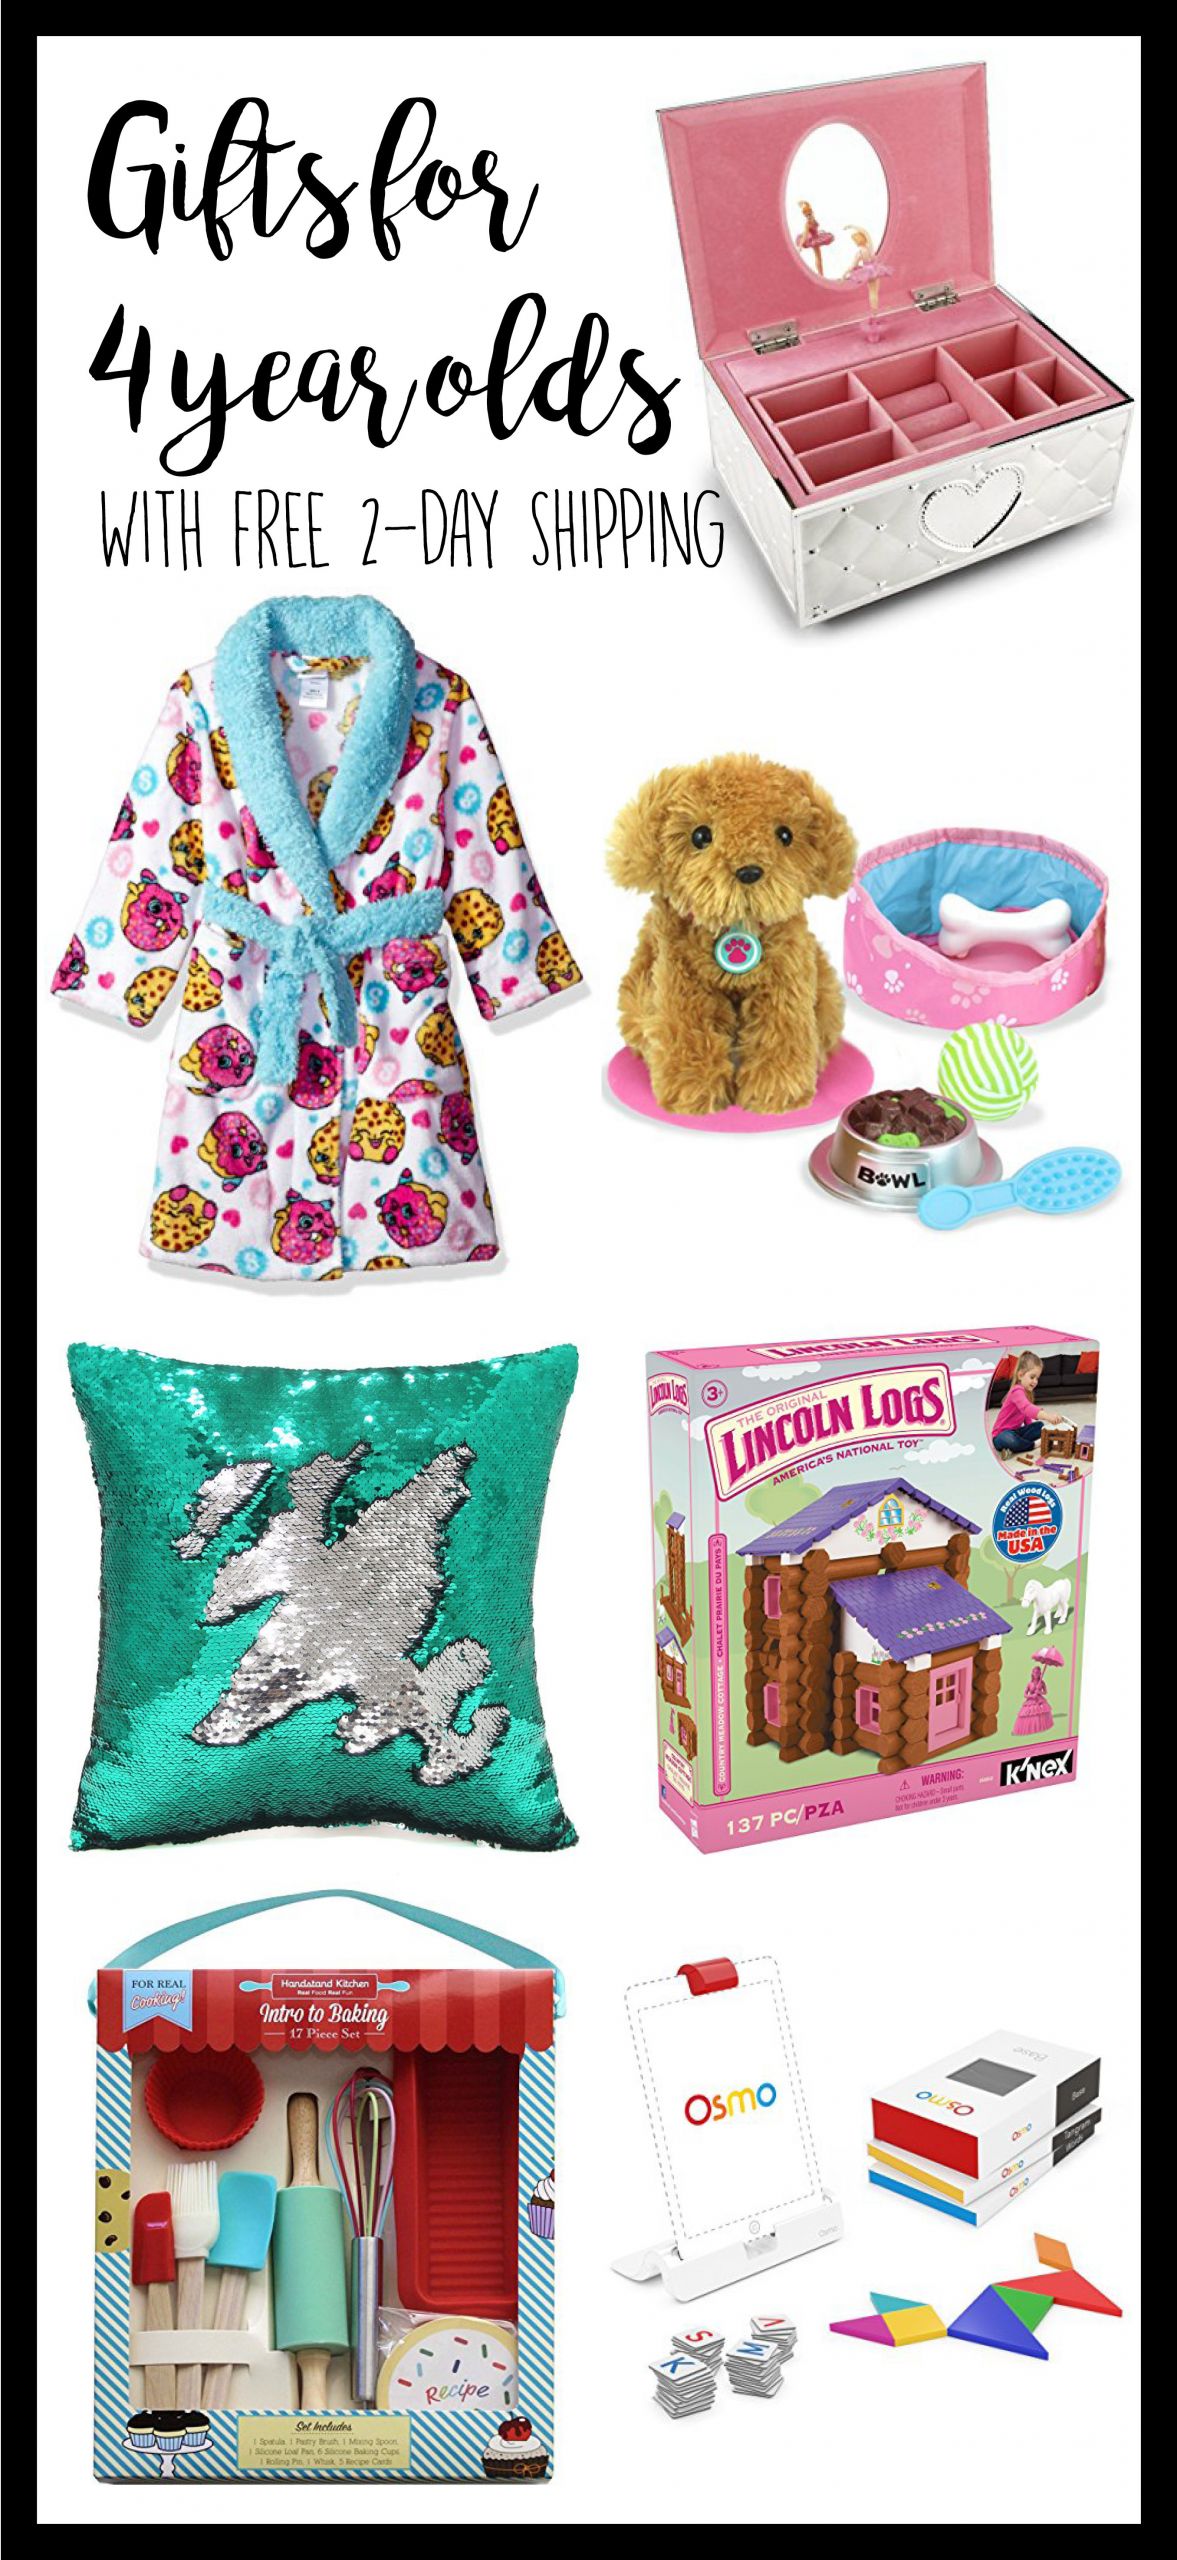 Gift Ideas For Four Year Old Girls
 4 Year Old Gift Ideas Gift ideas for 4 year old Girls